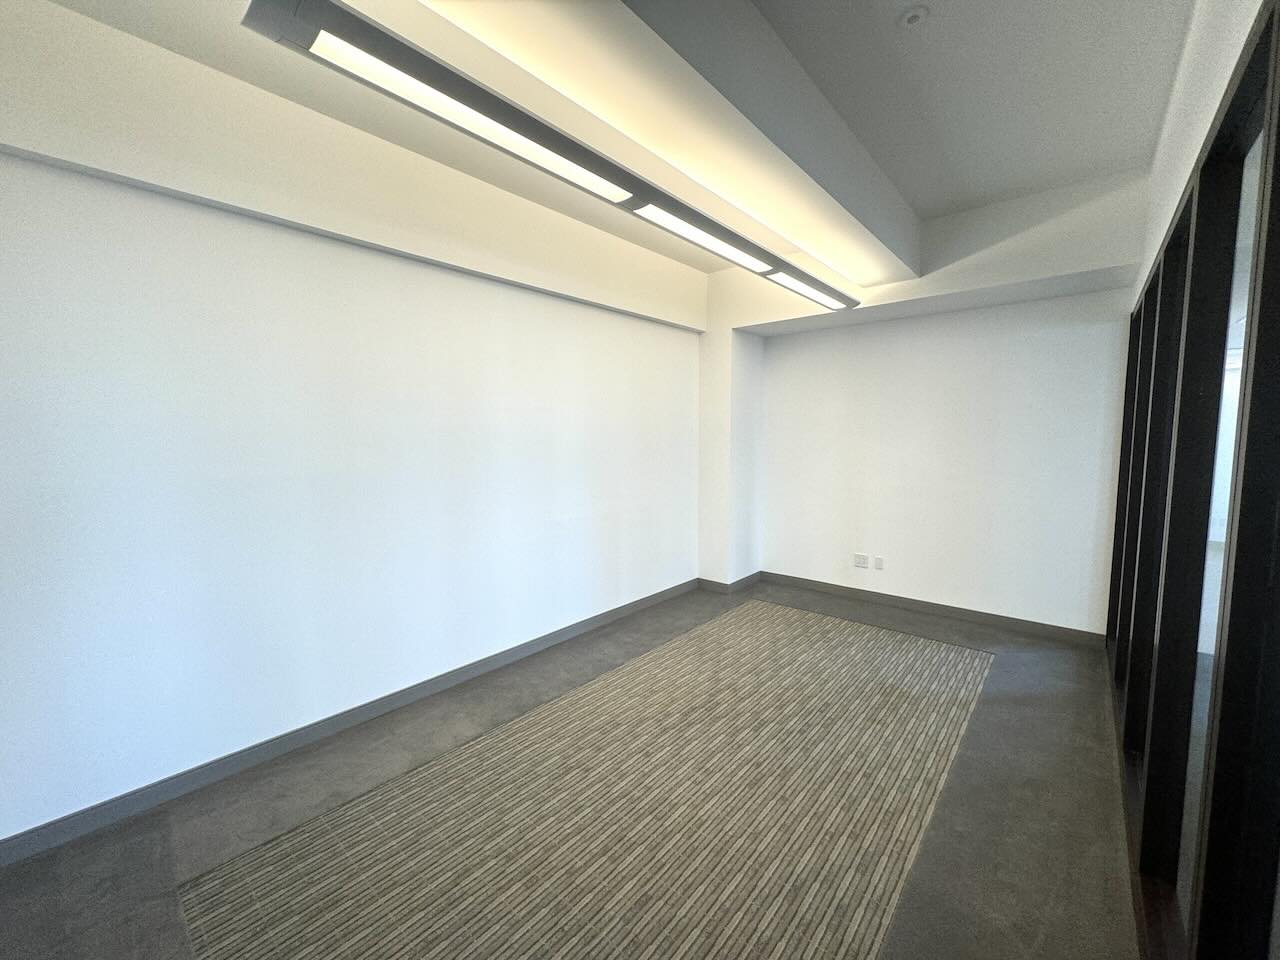 350 5th Avenue Office Space - Meeting Room Interior